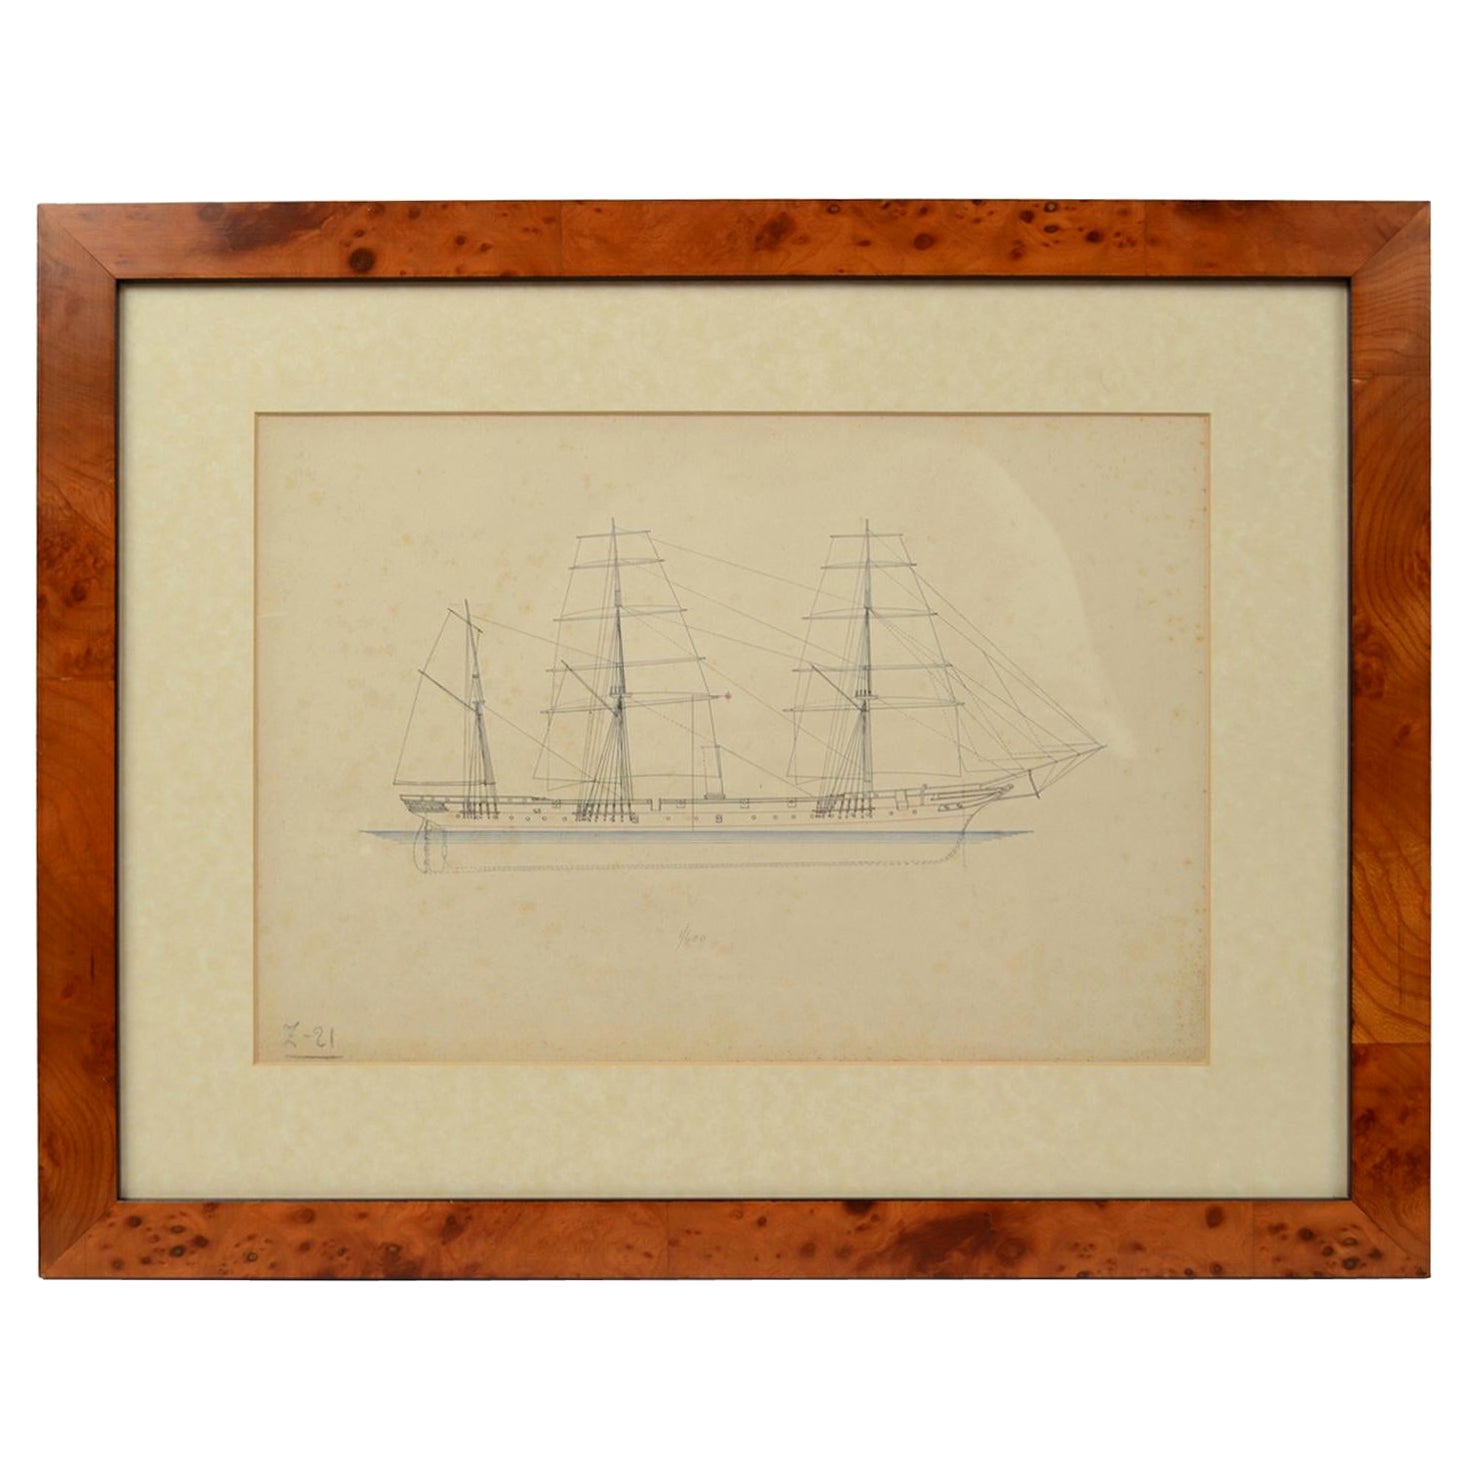 Print No. 1 of 400 Depicting a Nautical Schooner Made in the Mid-19th Century For Sale